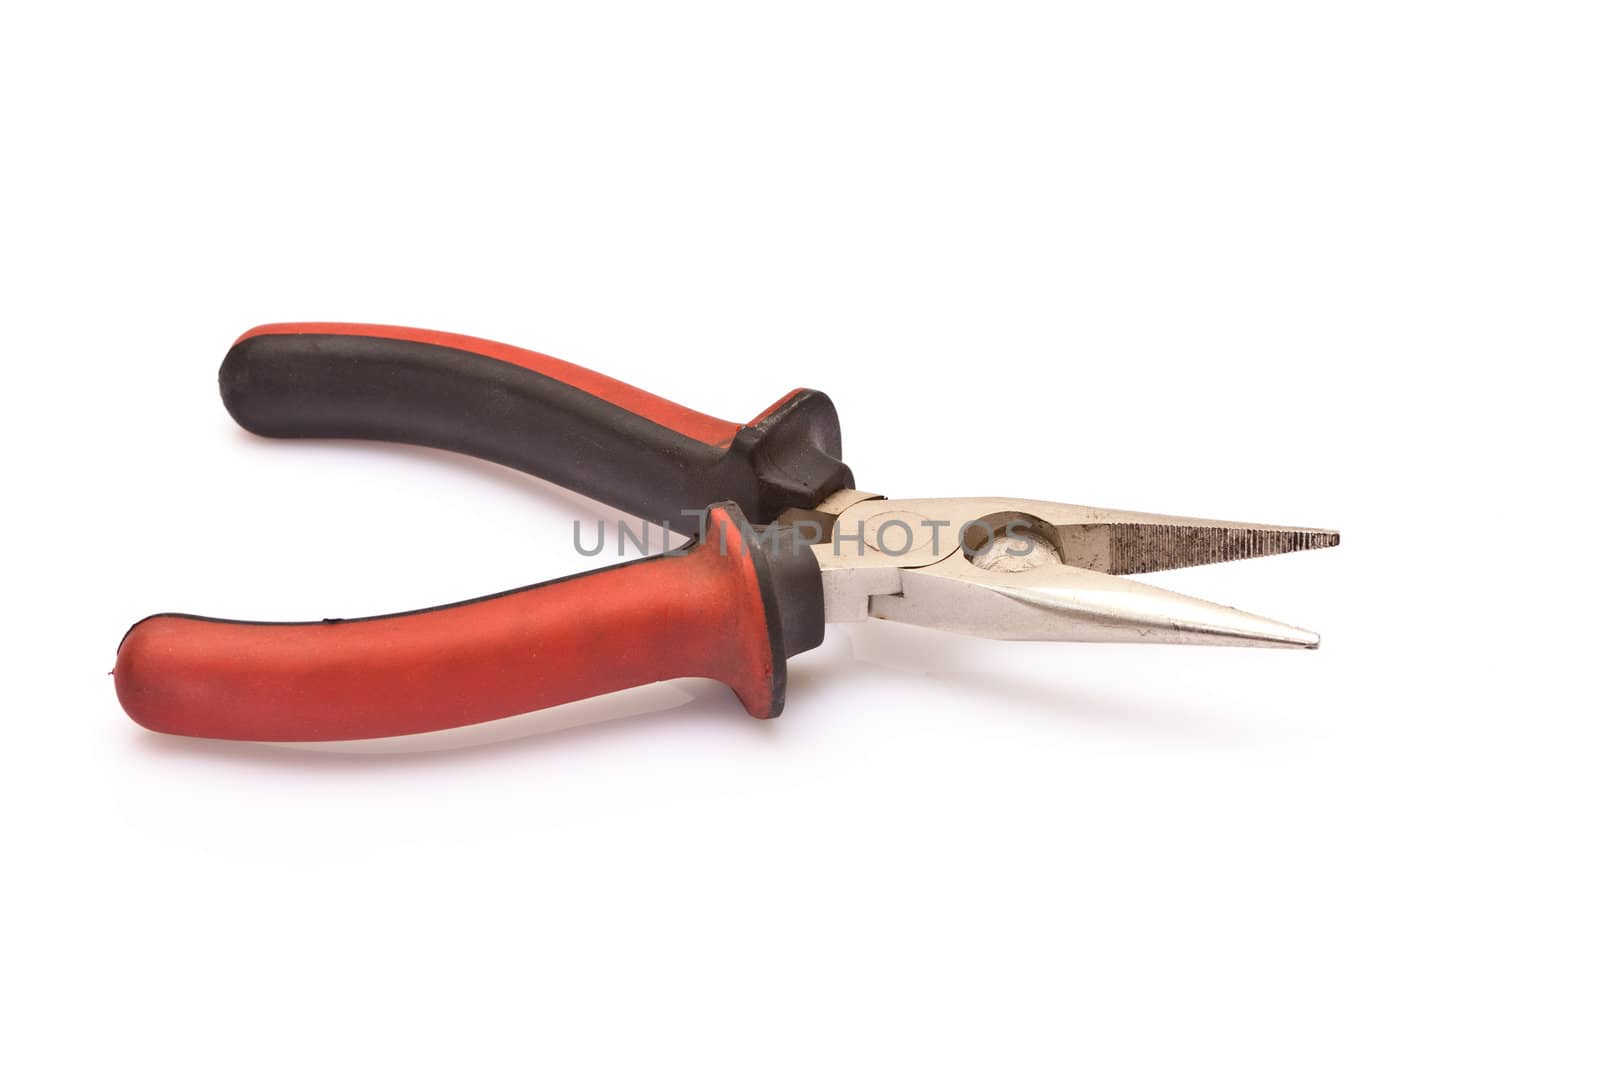 A new pair of needle-nose pliers on a white background. by Discovod